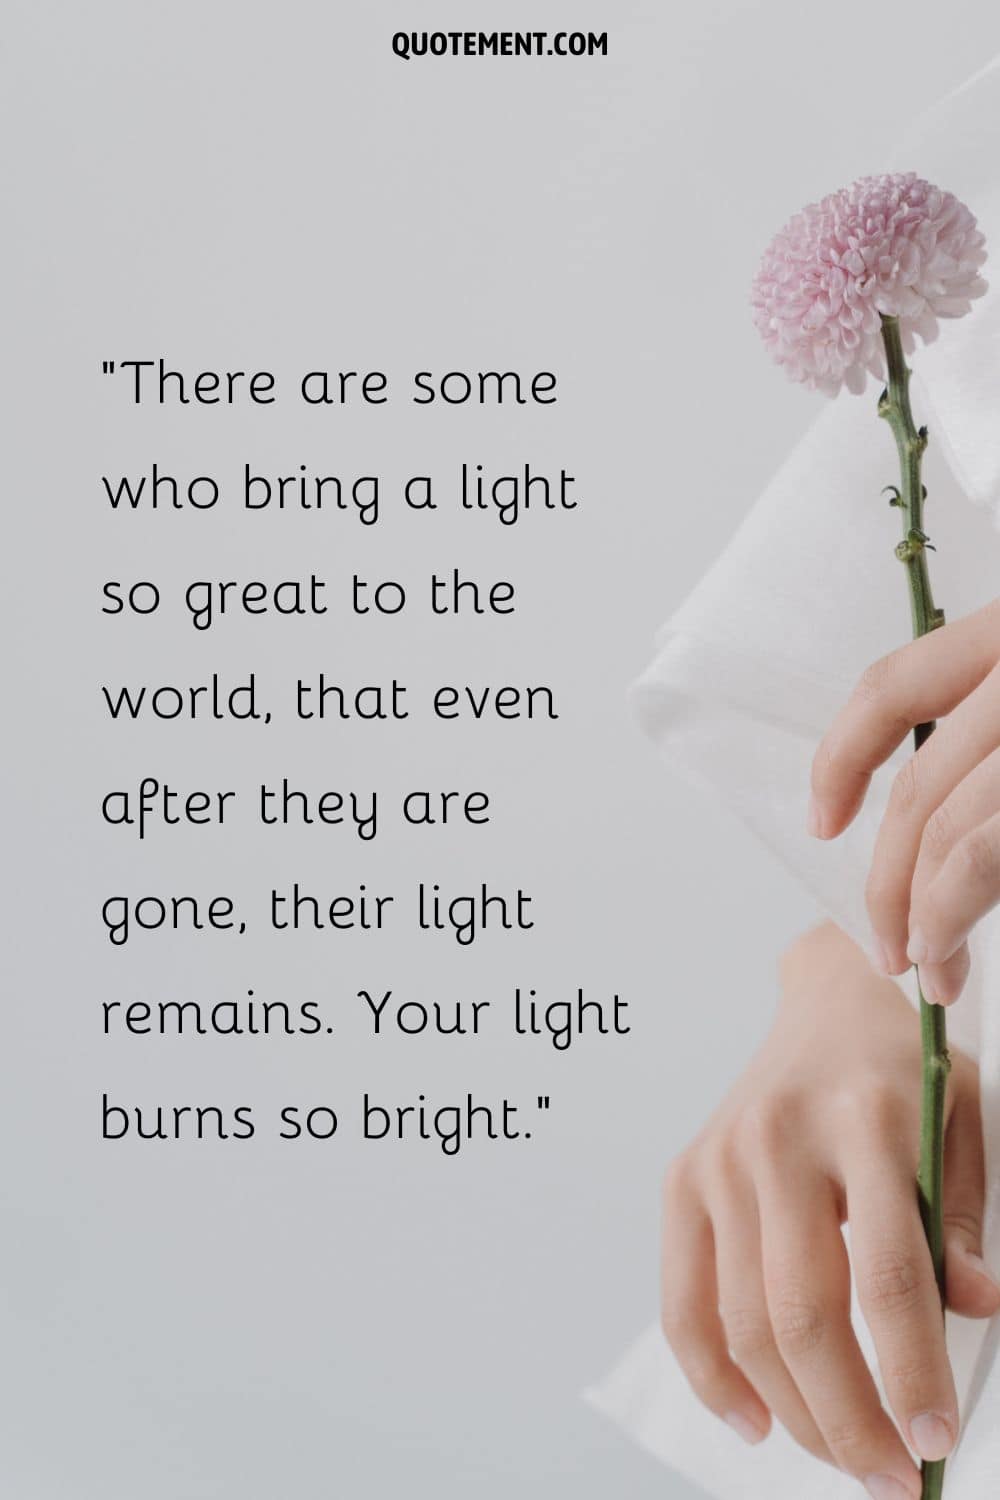 There are some who bring a light so great to the world, that even after they are gone, their light remains. Your light burns so bright.